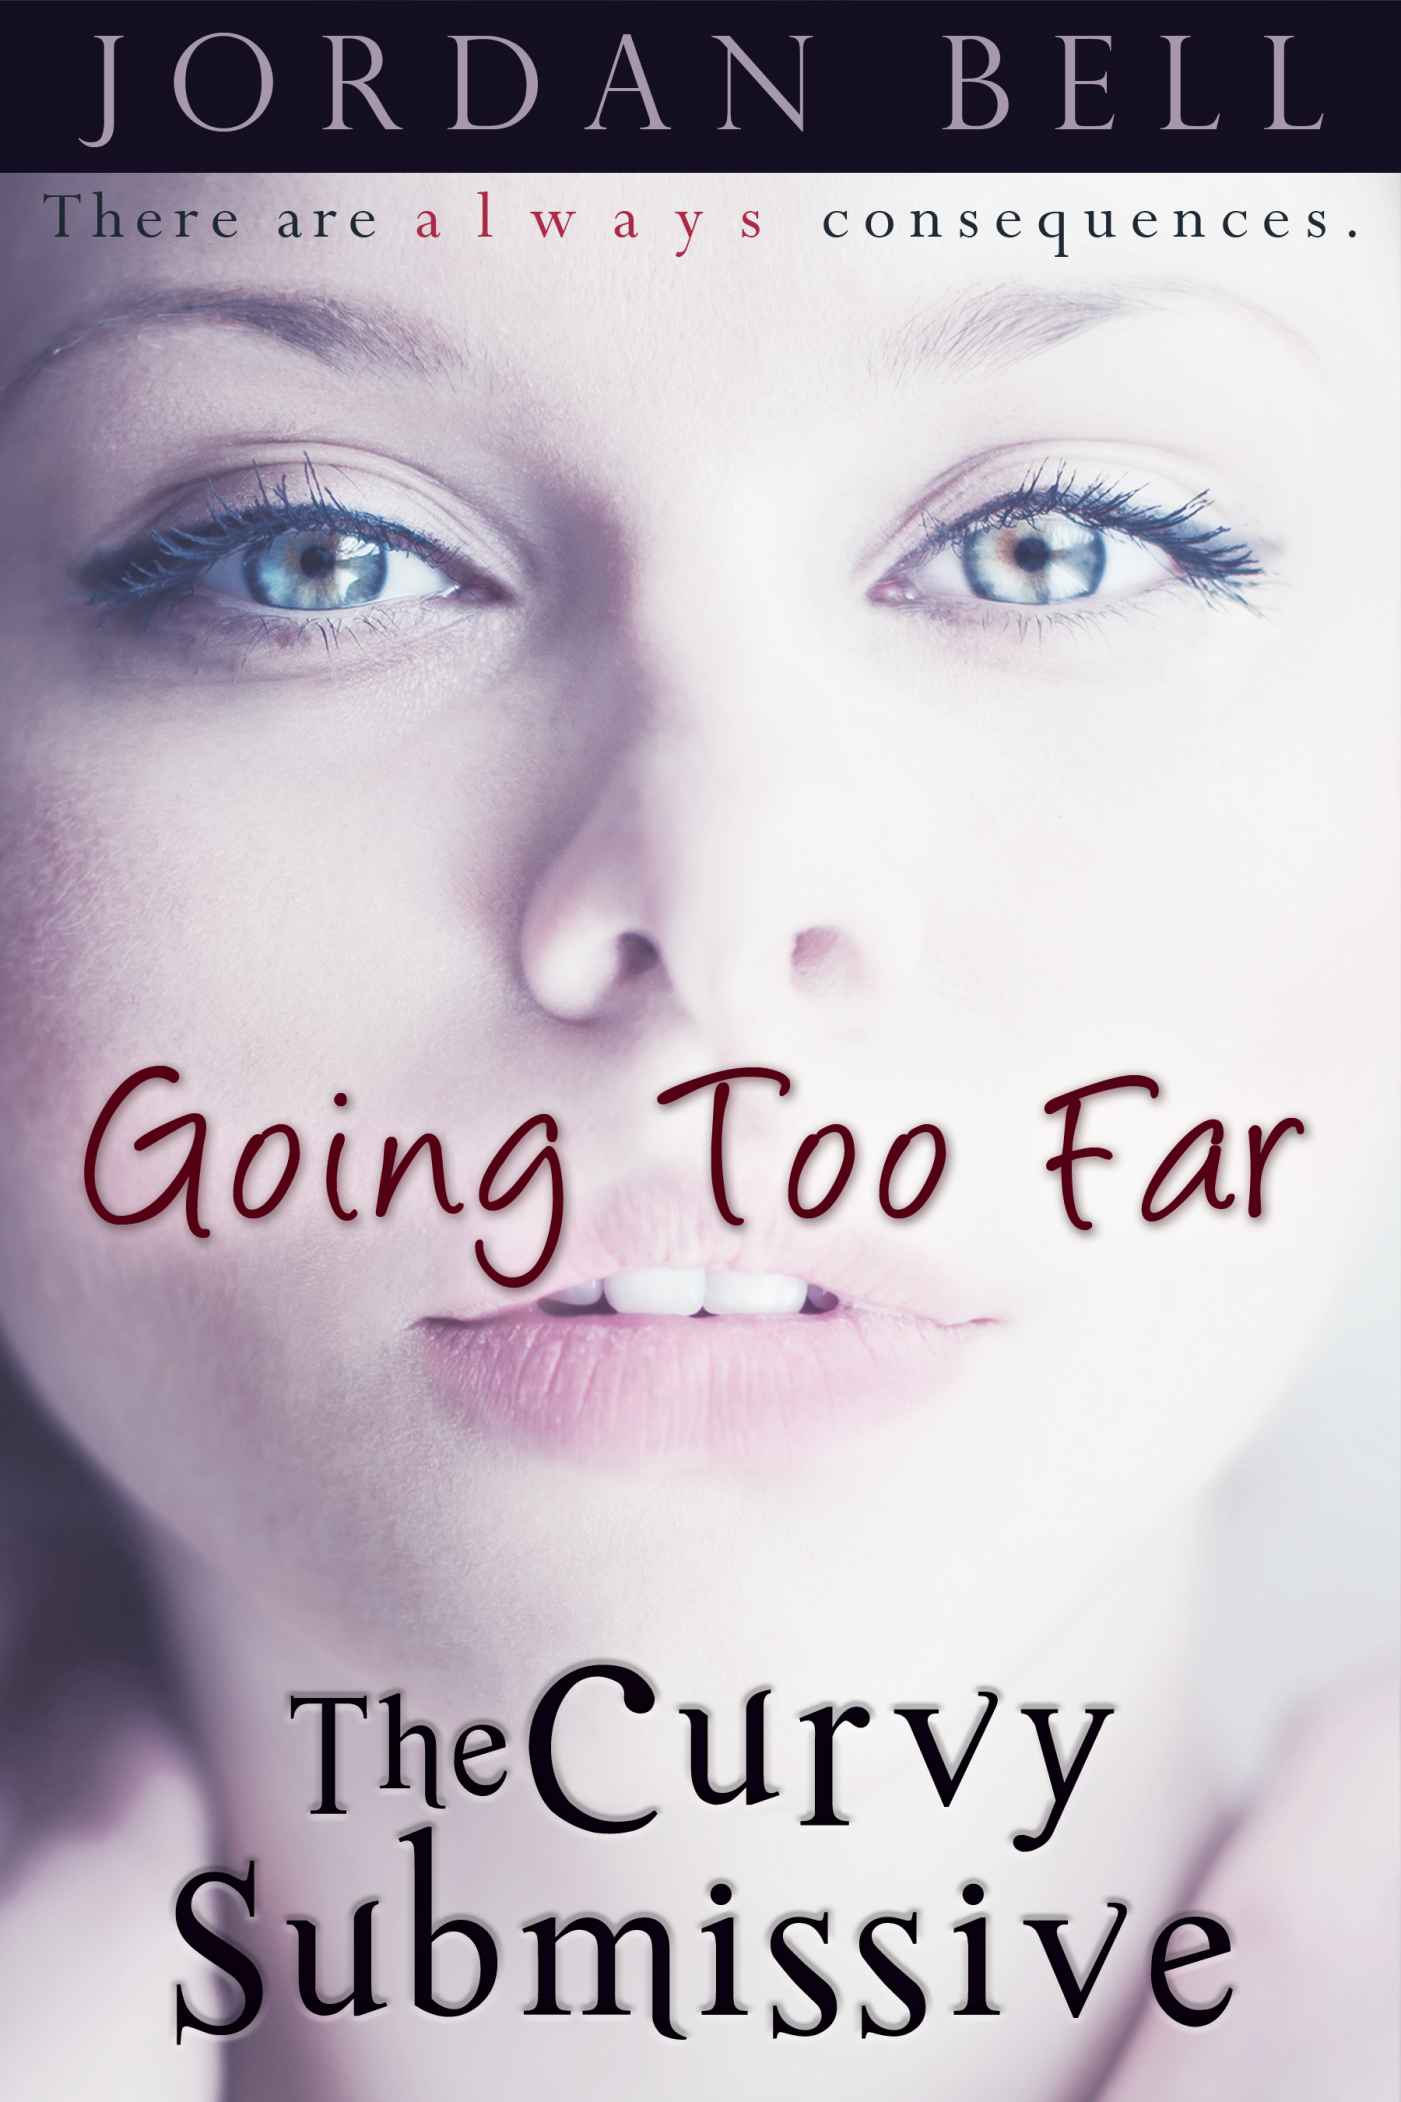 Going Too Far (The Curvy Submissive) by Jordan Bell